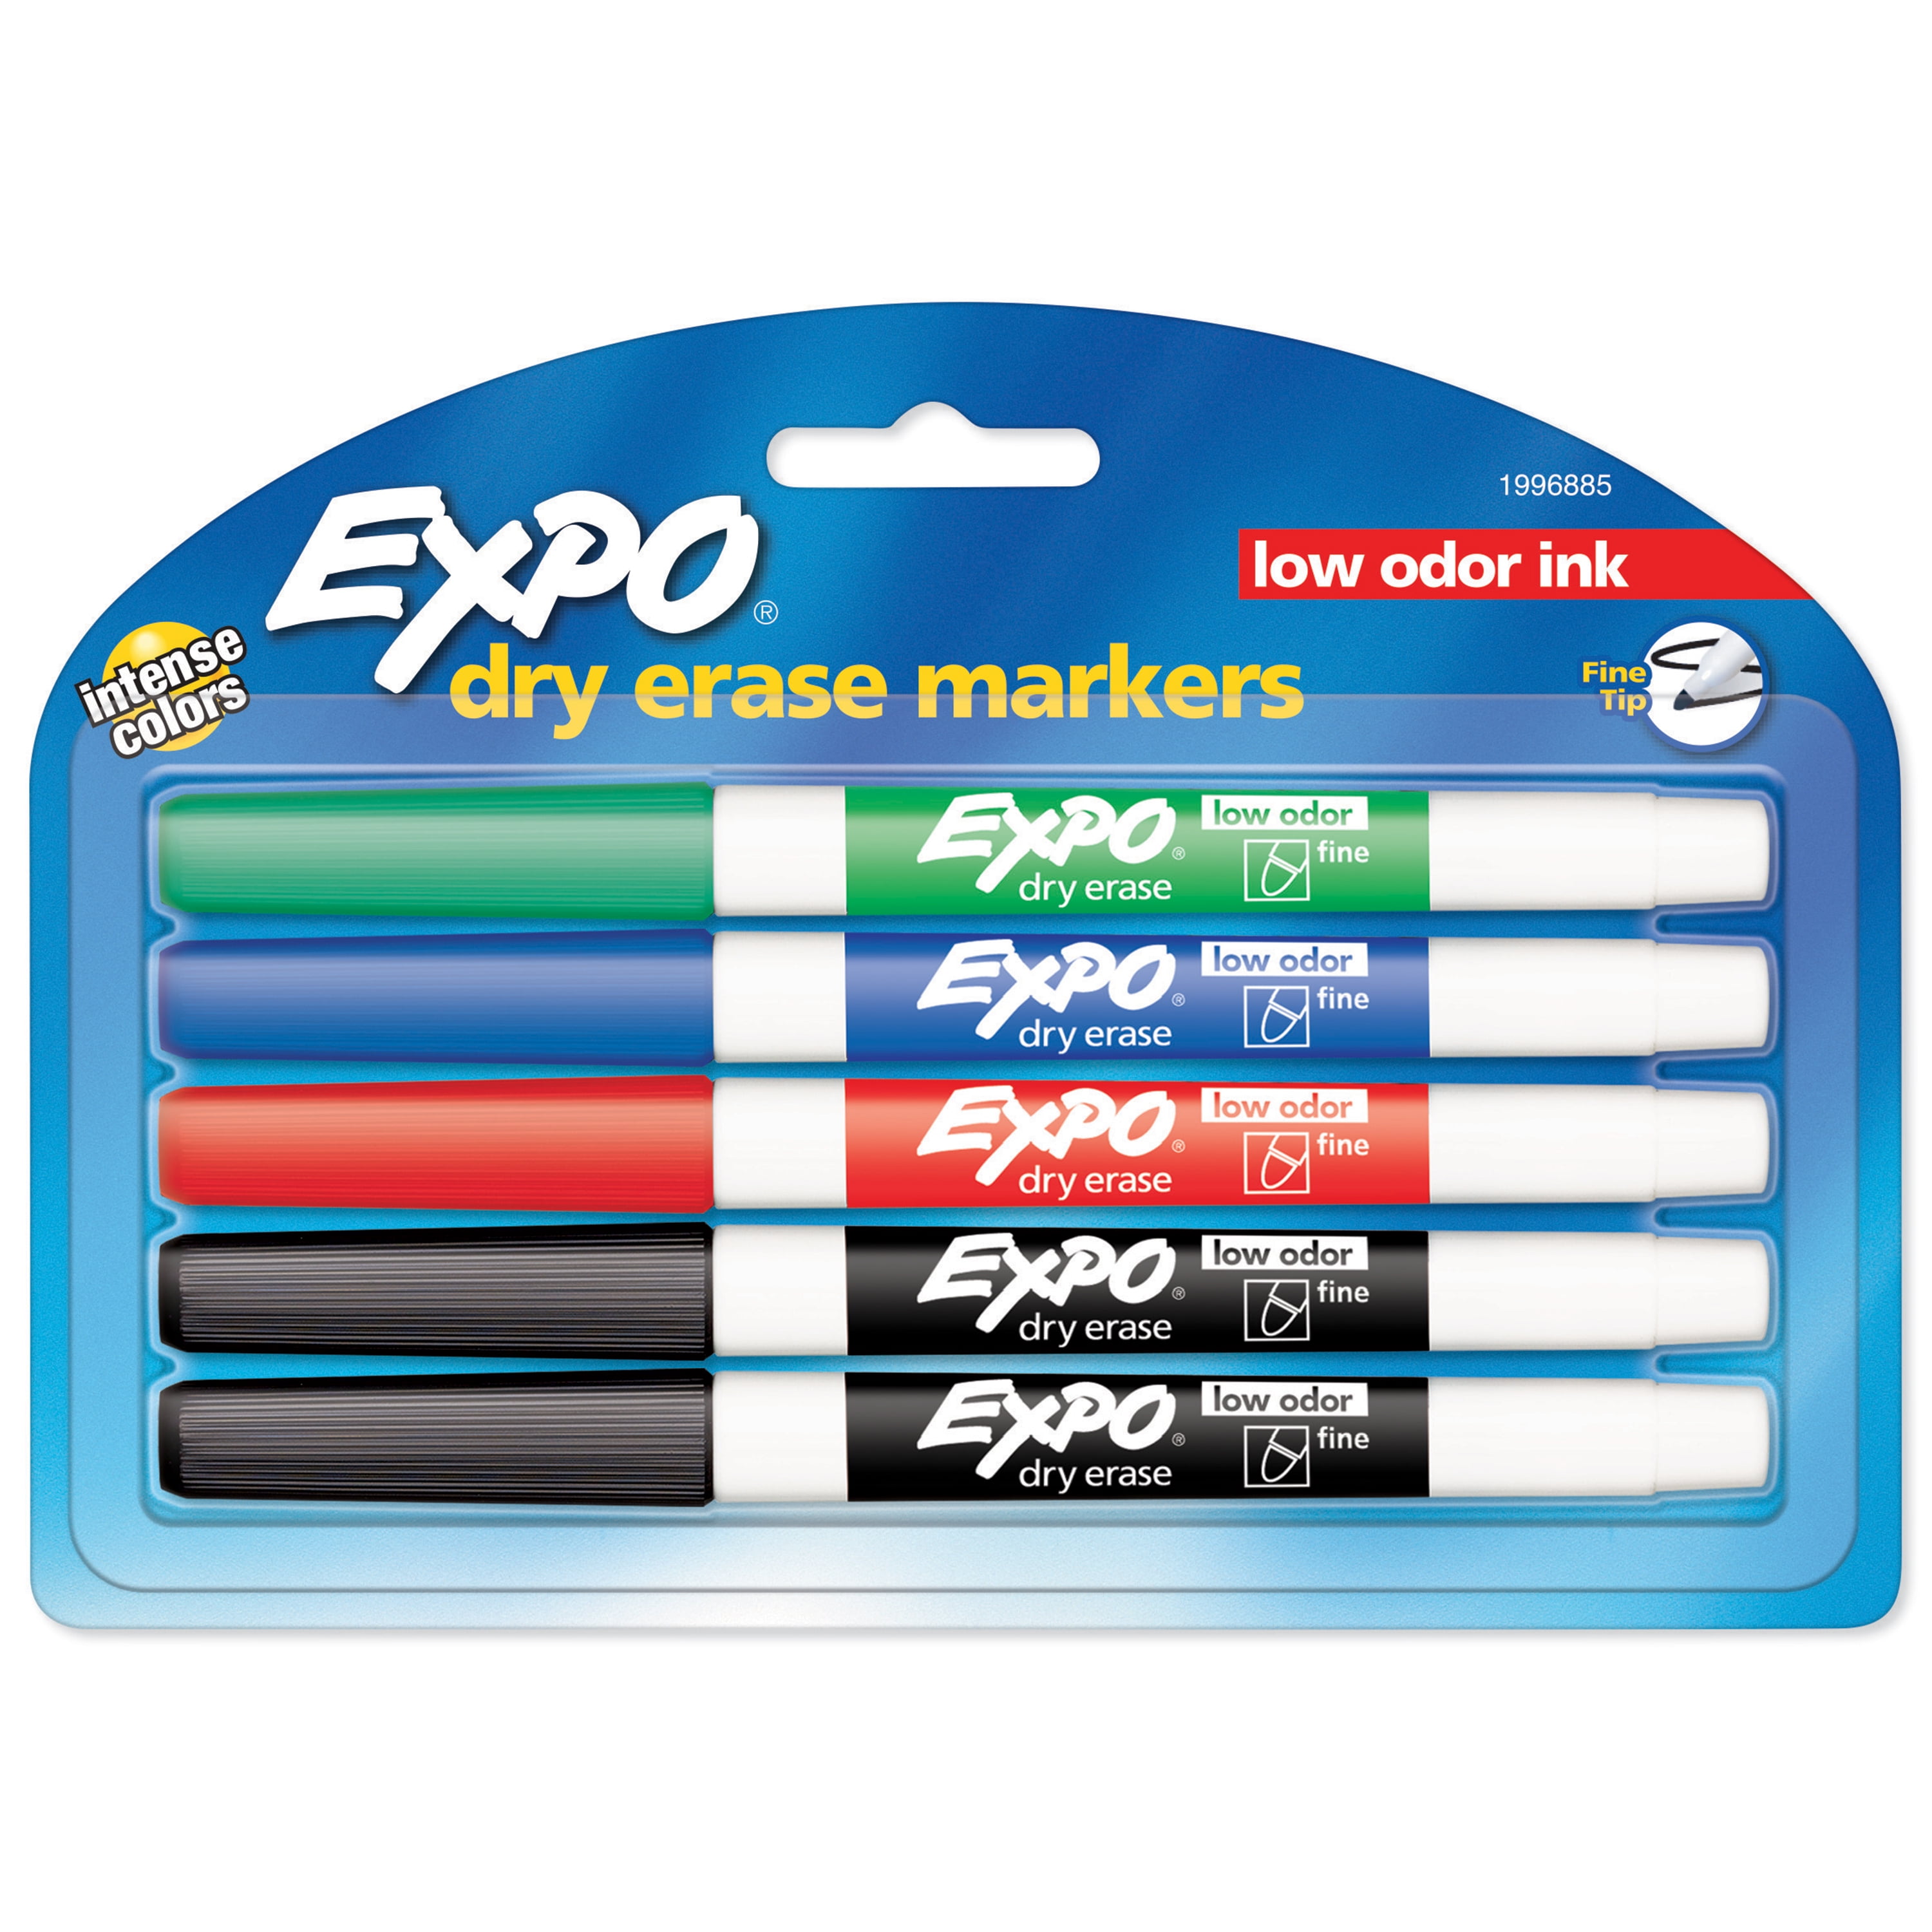 Dry Erase Markers, Shuttle Art 60 Bulk Pack 15 Colors Magnetic Whiteboard  Markers with Erase, Fine Point Dry Erase Markers Perfect for Writing on  Whiteboards, Glass, Mirror for School Supplies Office 